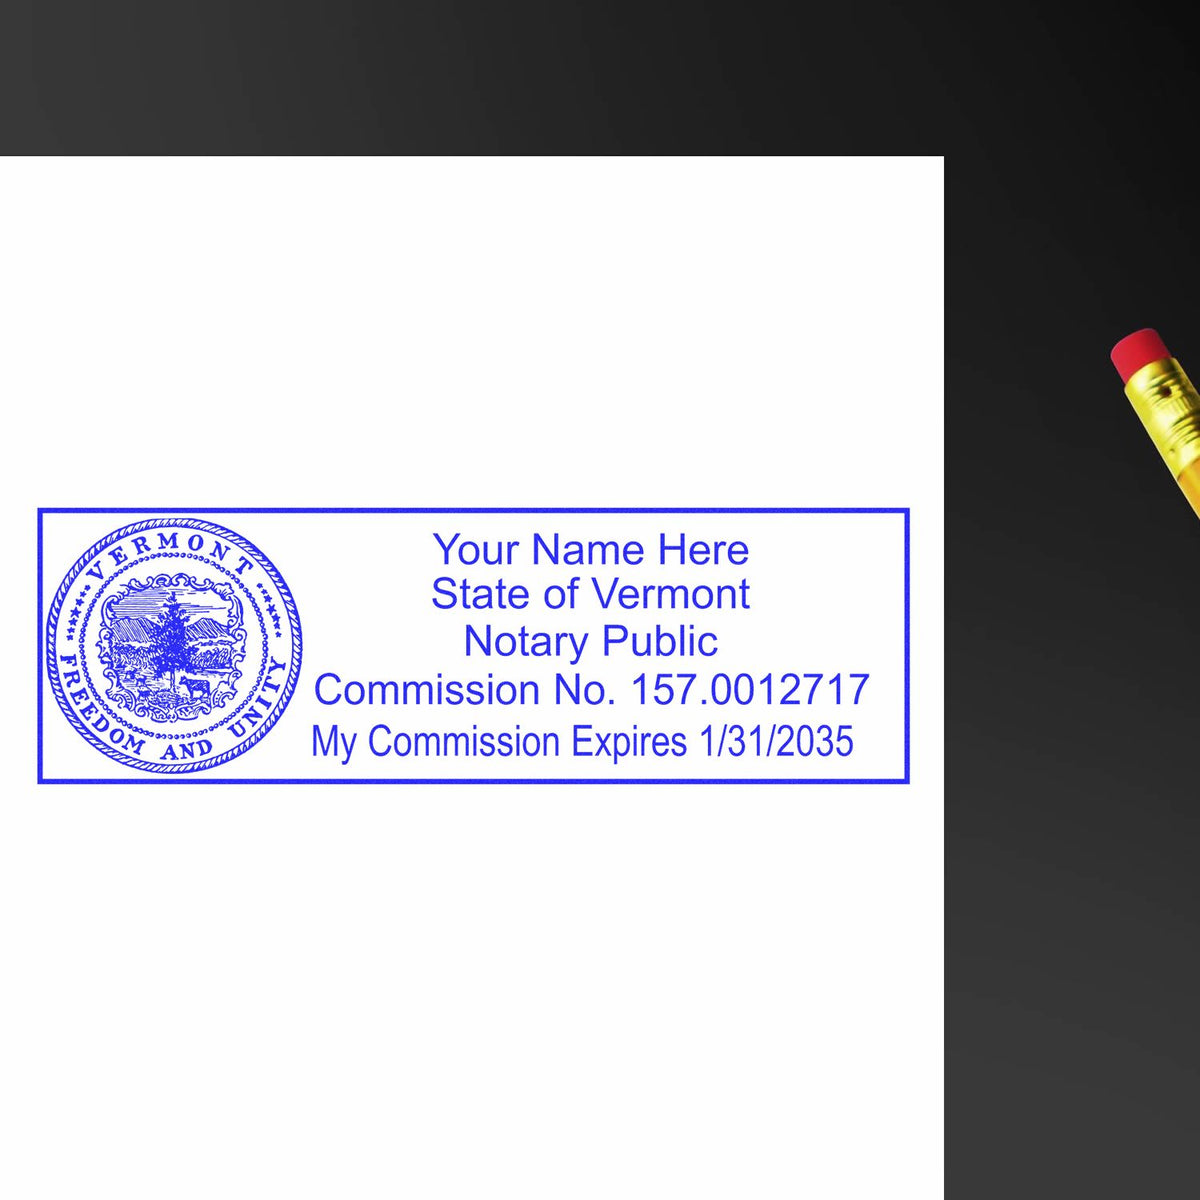 This paper is stamped with a sample imprint of the Slim Pre-Inked State Seal Notary Stamp for Vermont, signifying its quality and reliability.